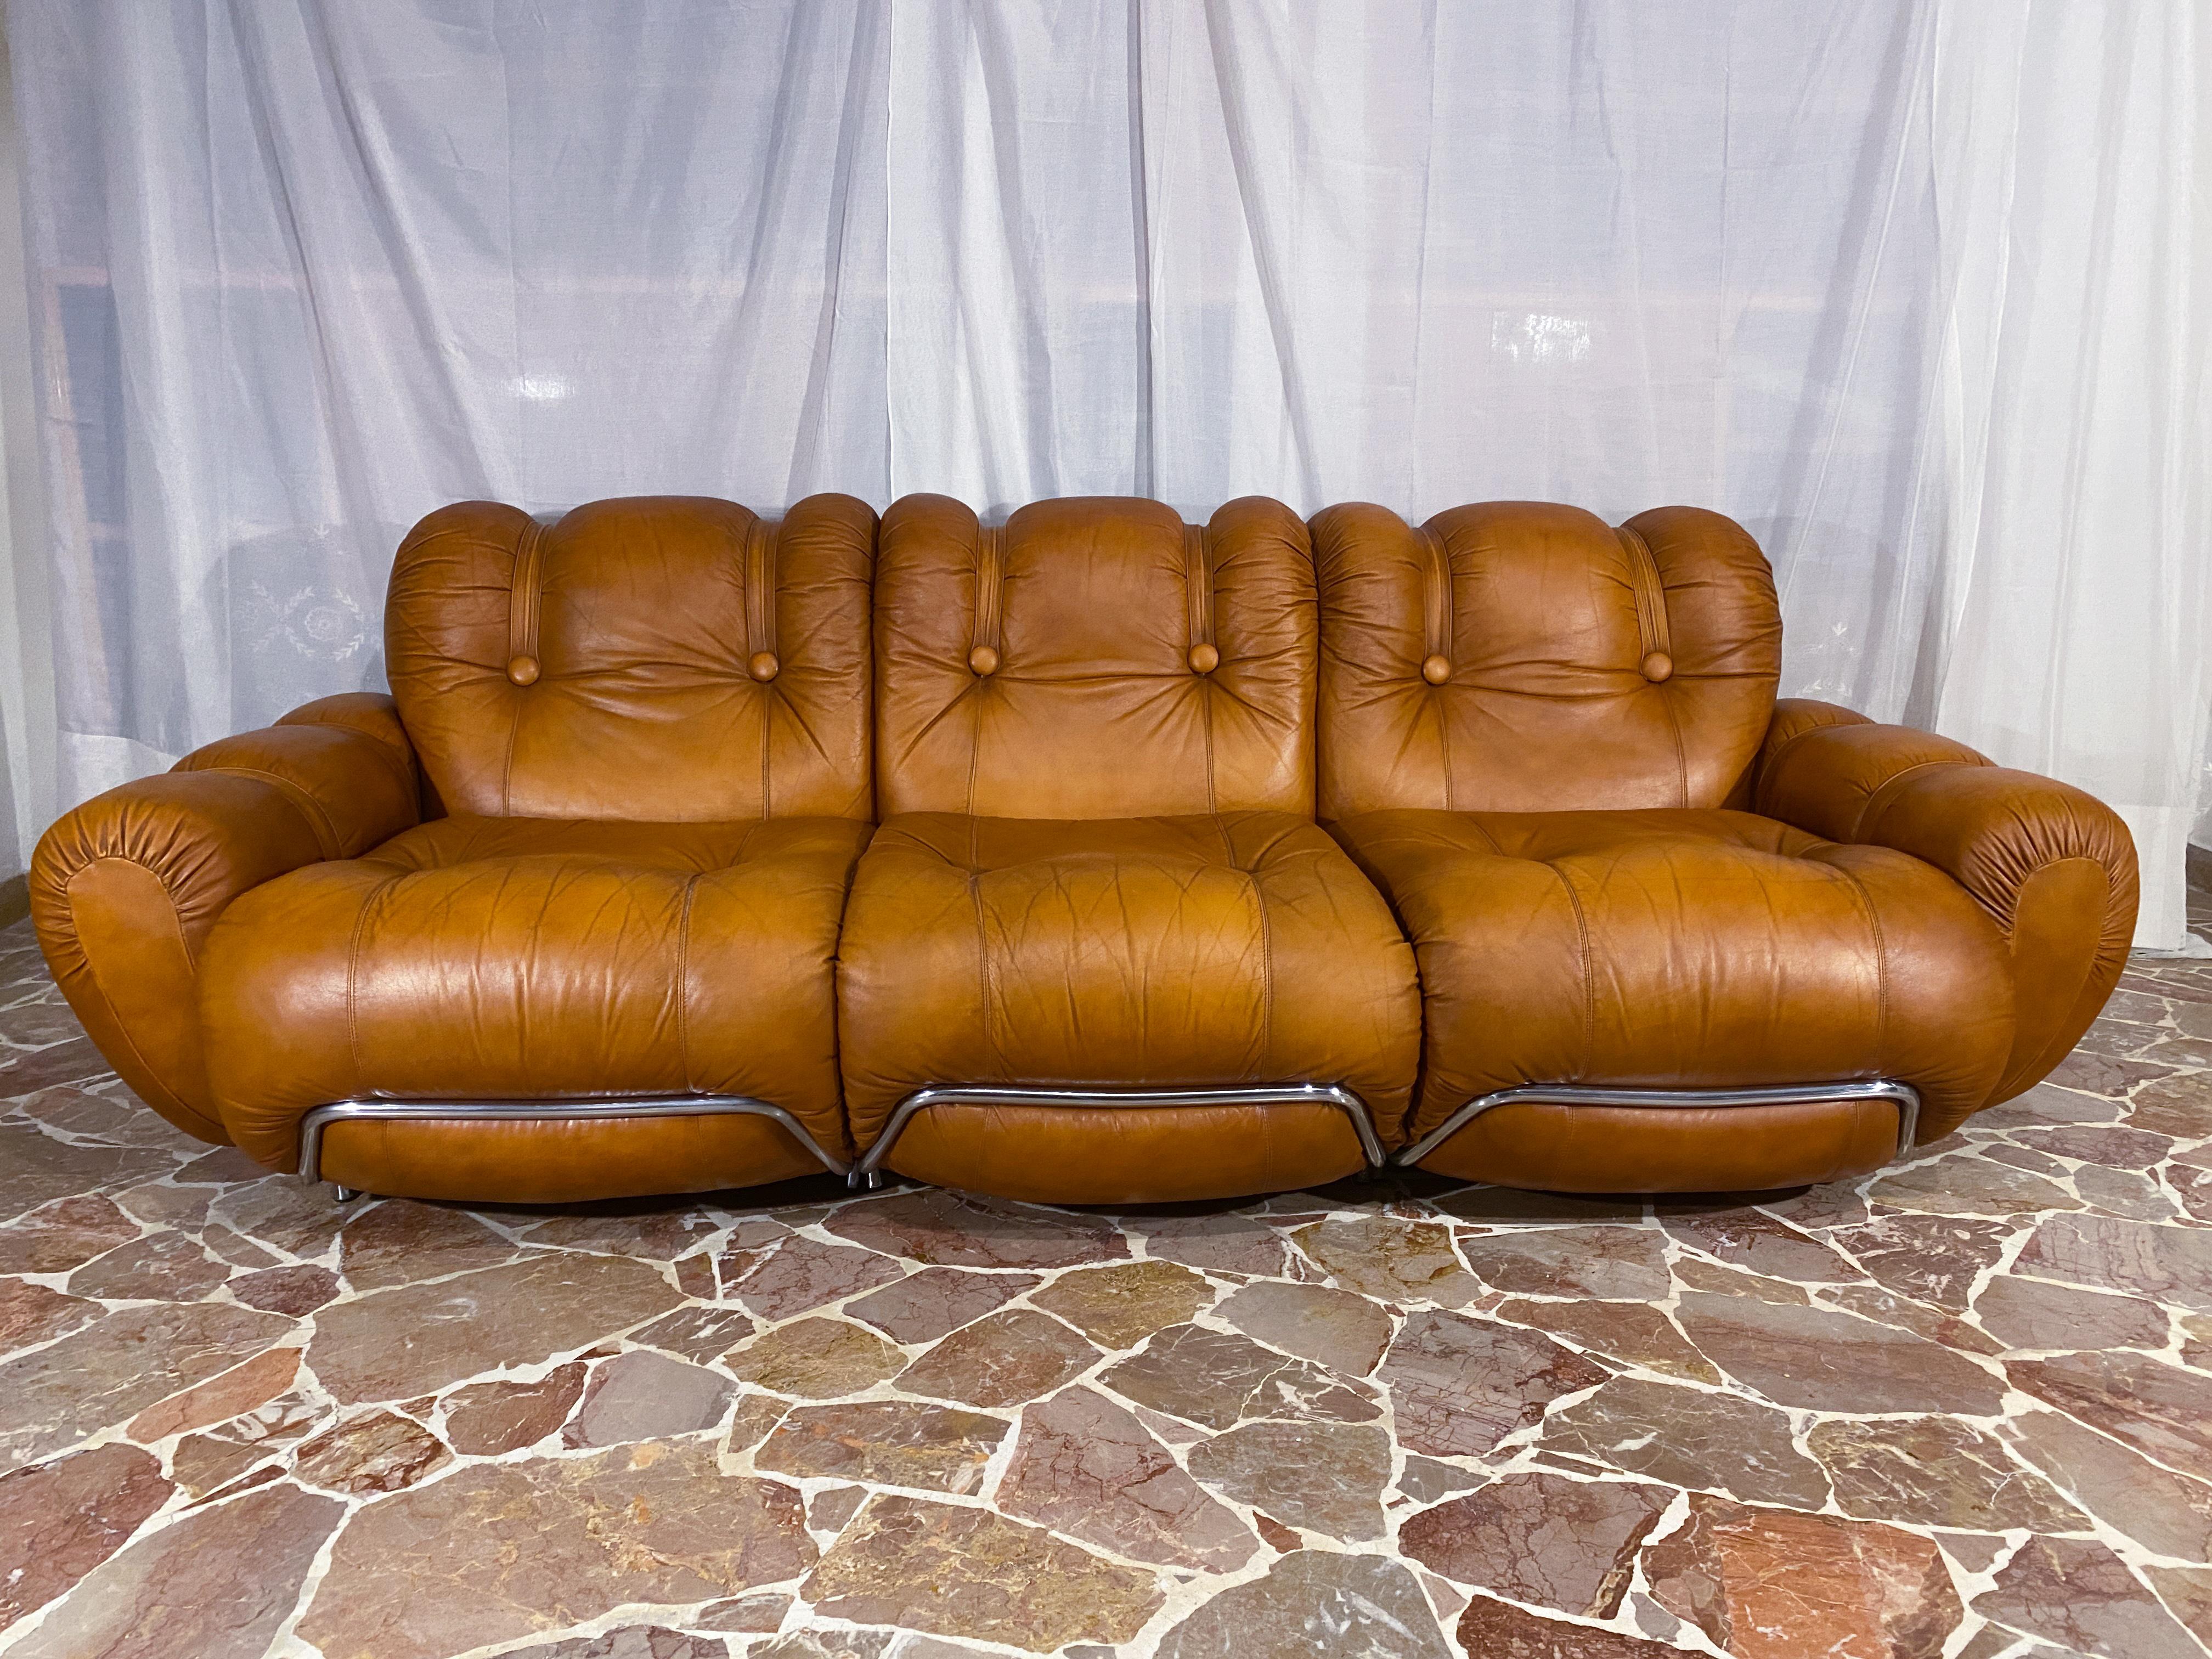 Late 20th Century Italian Midcentury Three-Seater Natural Leather Space Age Sofa, 1970s For Sale